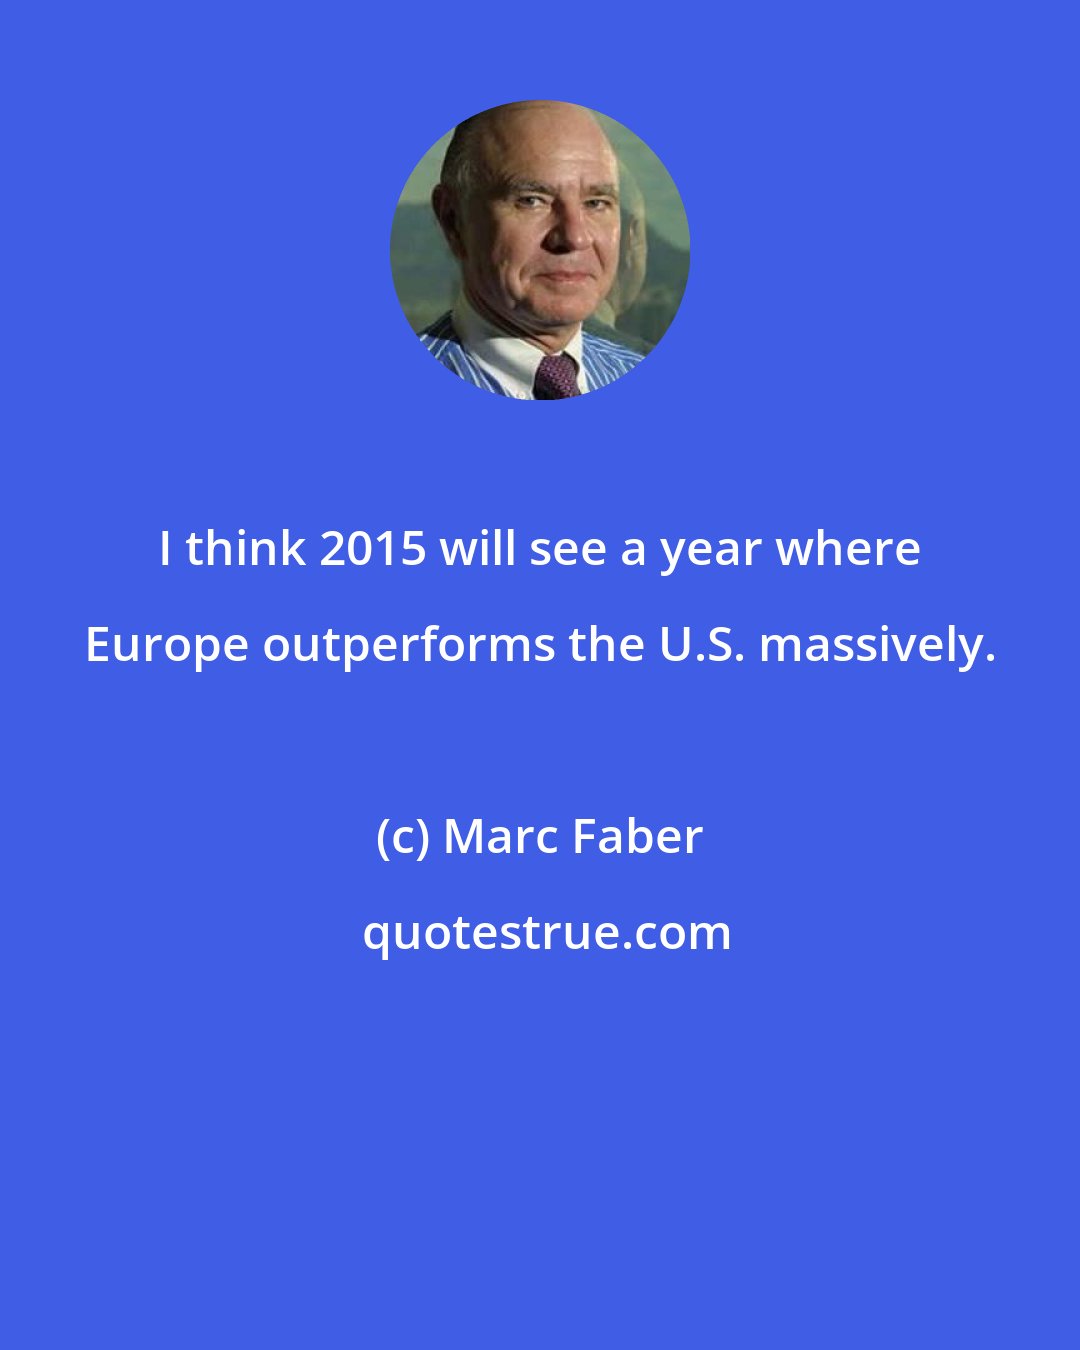 Marc Faber: I think 2015 will see a year where Europe outperforms the U.S. massively.